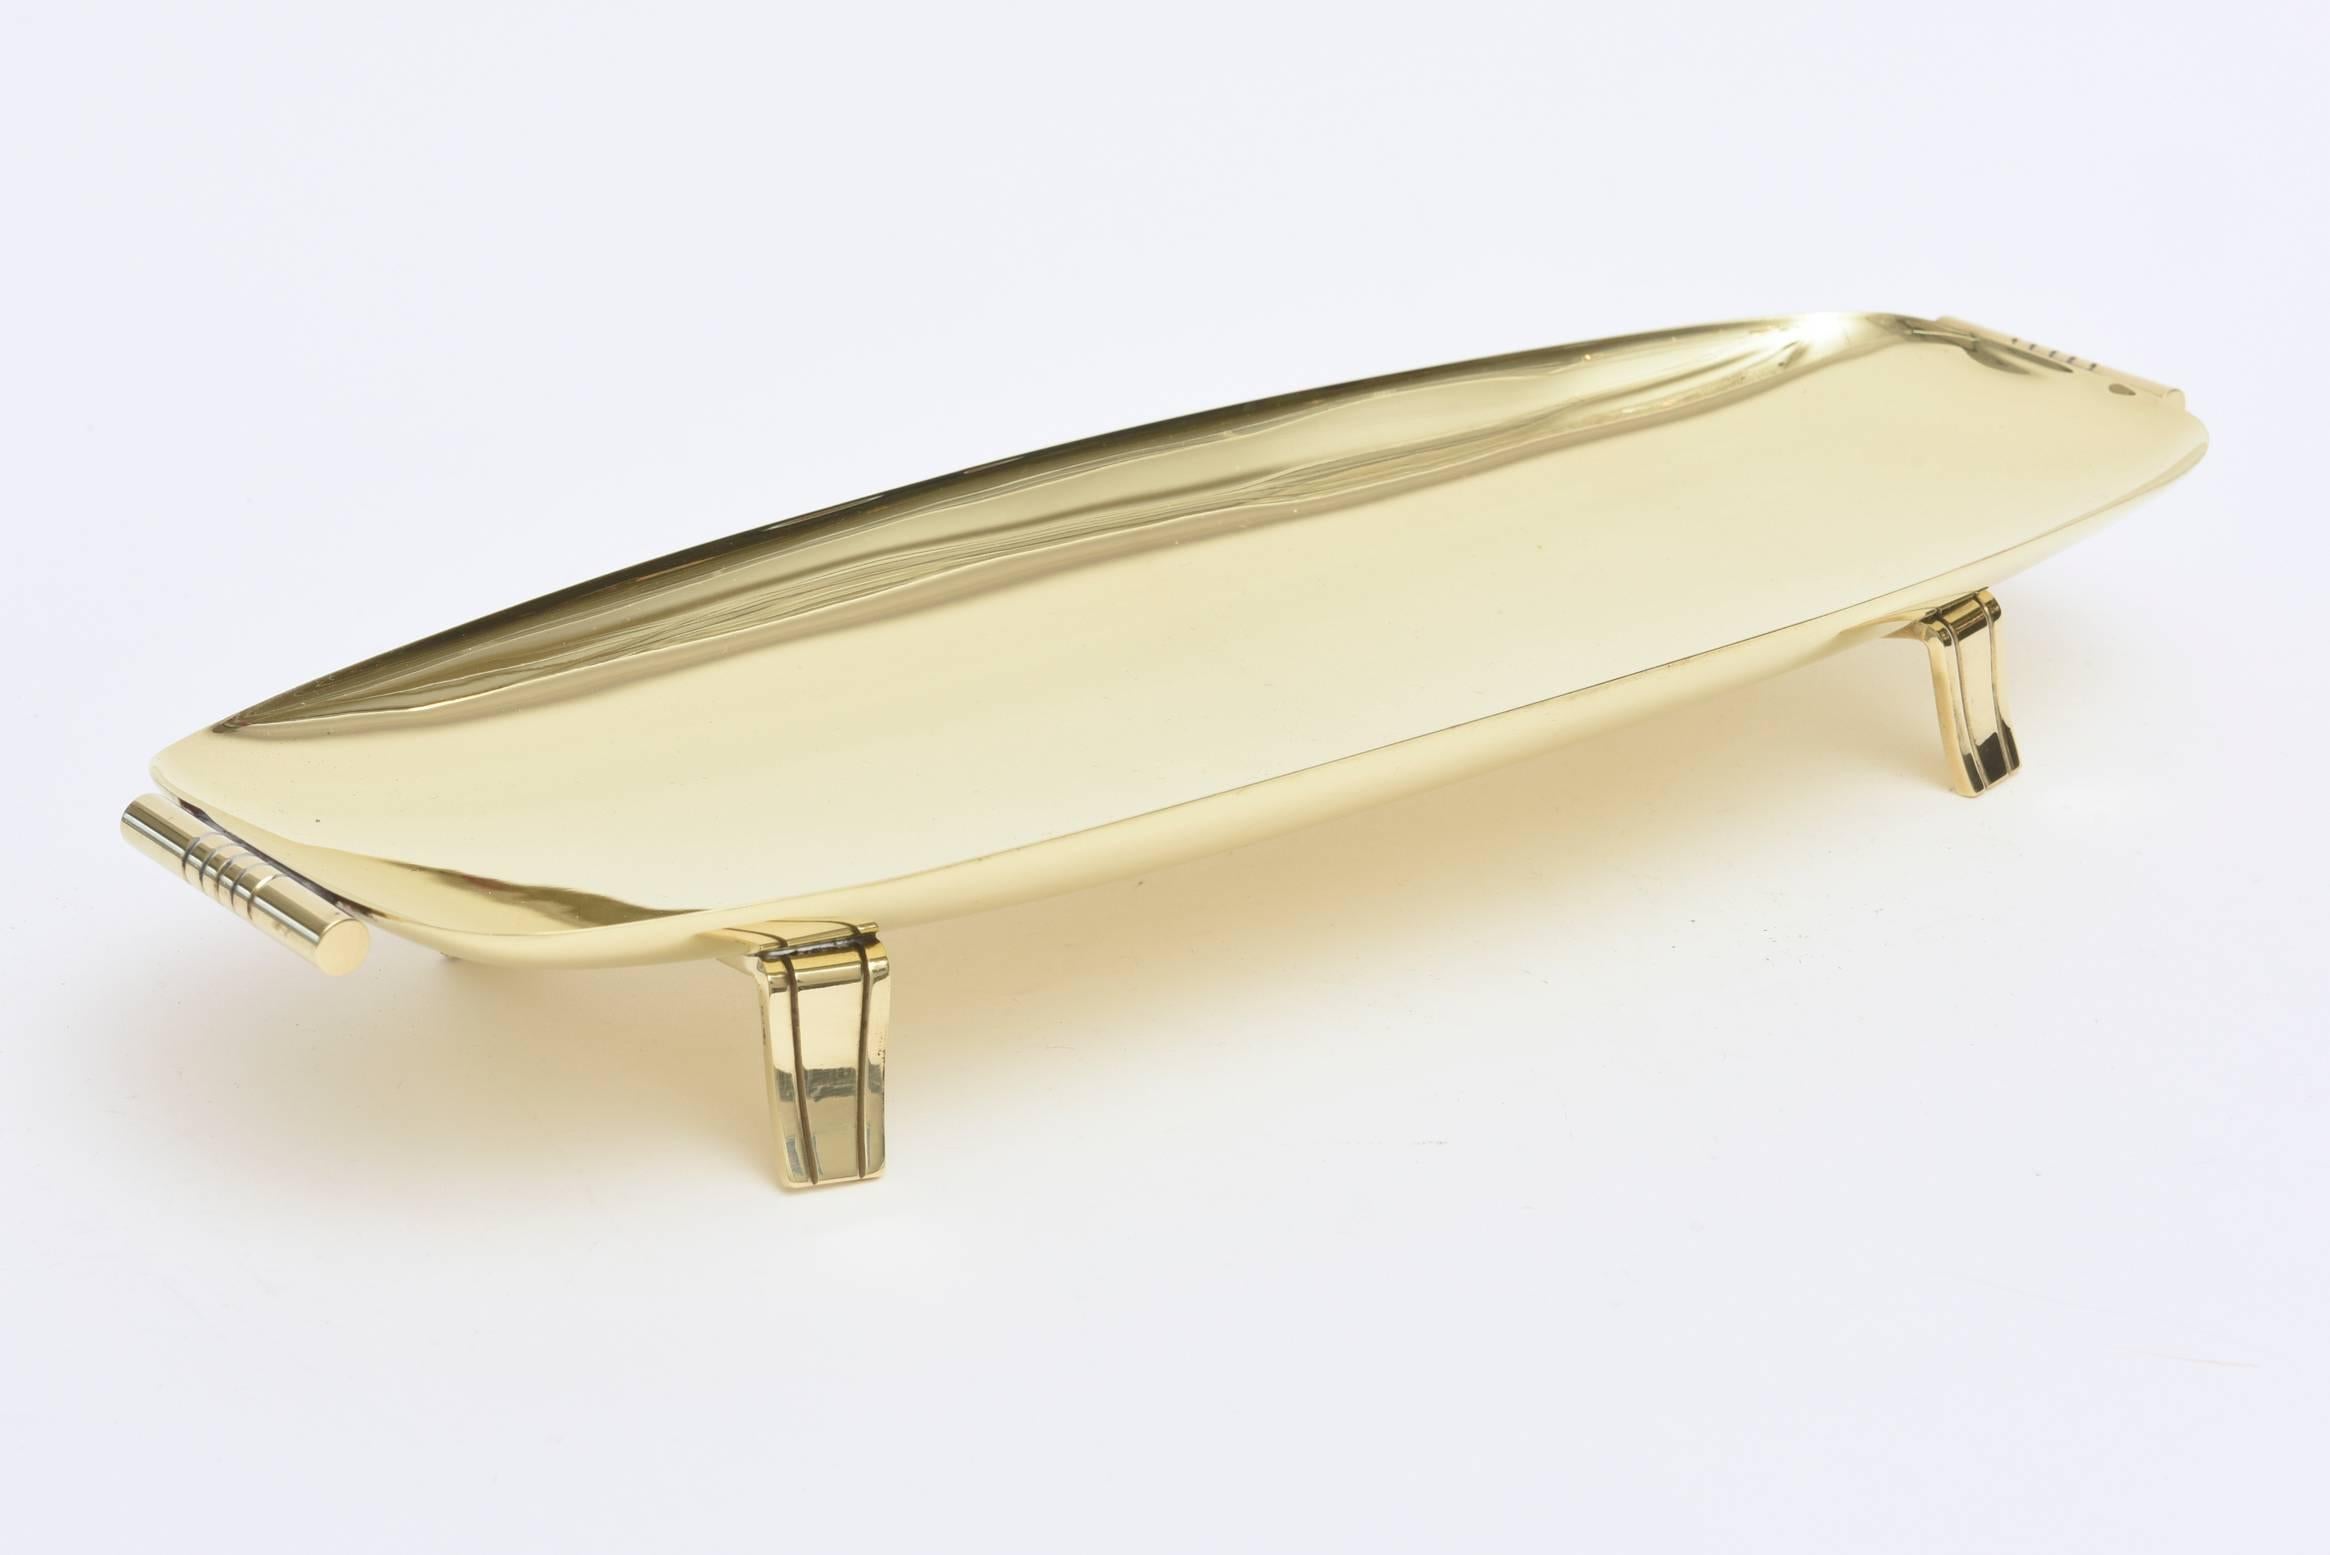 This great Mid-Century Modern Tommi Parzinger polished brass bowl was made by Dorlyn Silversmiths as hallmarked on the bottom. The rolled handles and feet are pure Parzinger. It is elongated rectangle. Timeless! Classic! This is a fabulous bowl and